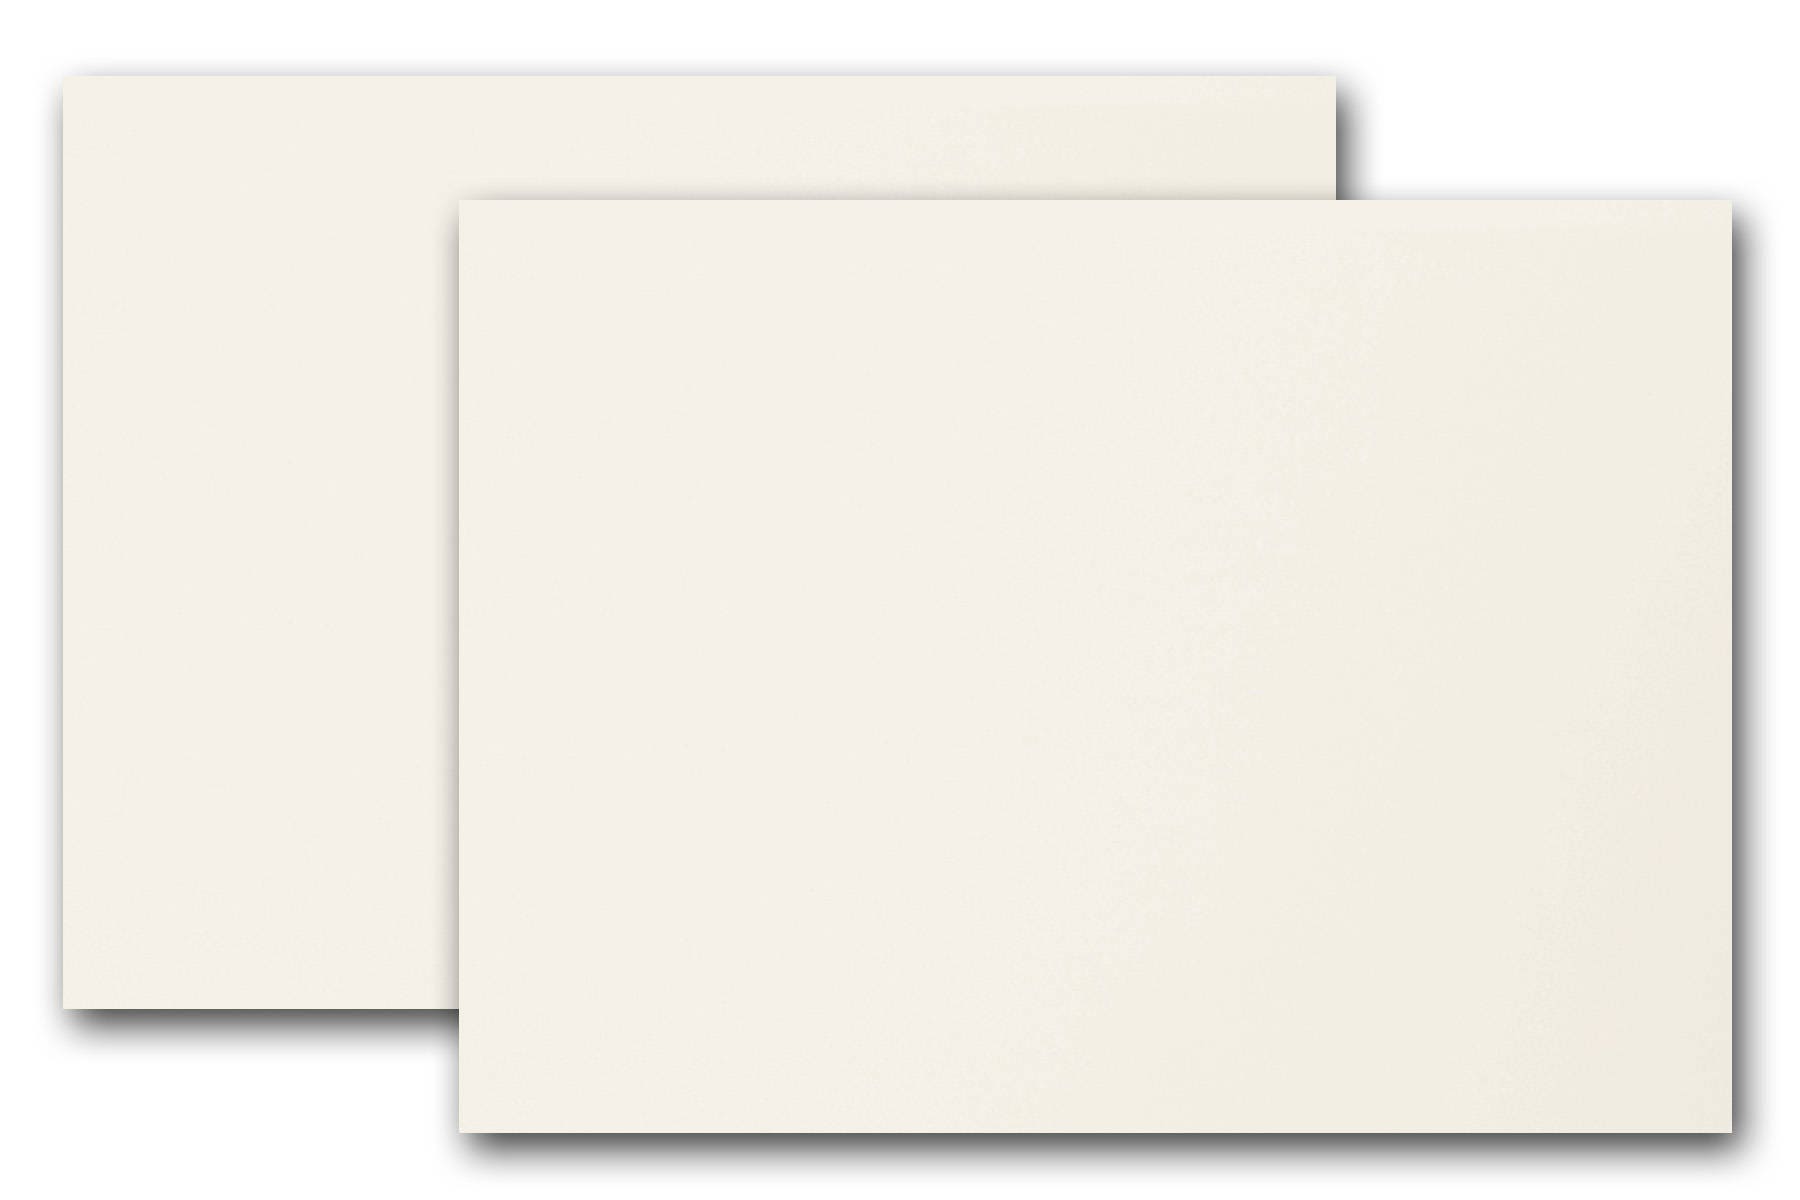 Cougar A4 Envelopes for 4x6 photos, cards and announcements - CutCardStock